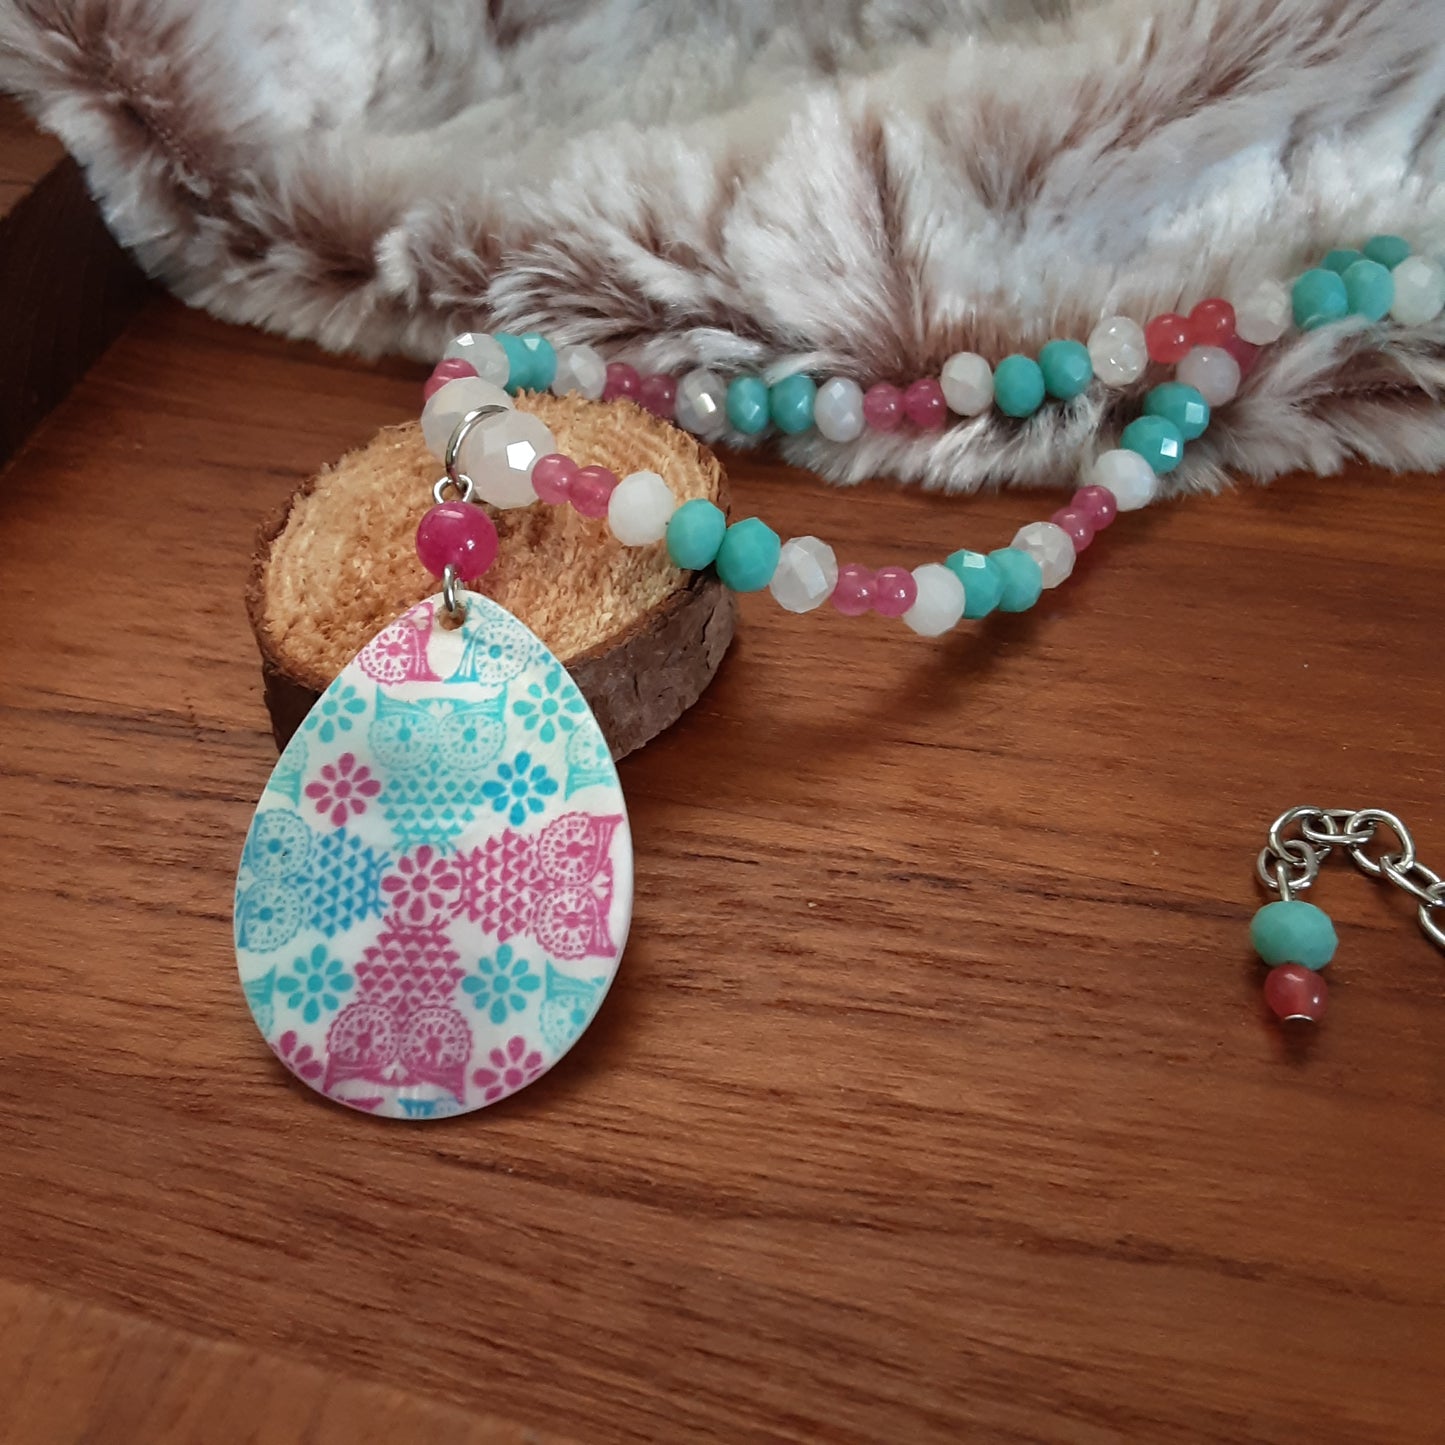 Owl necklace in blue, white and pink